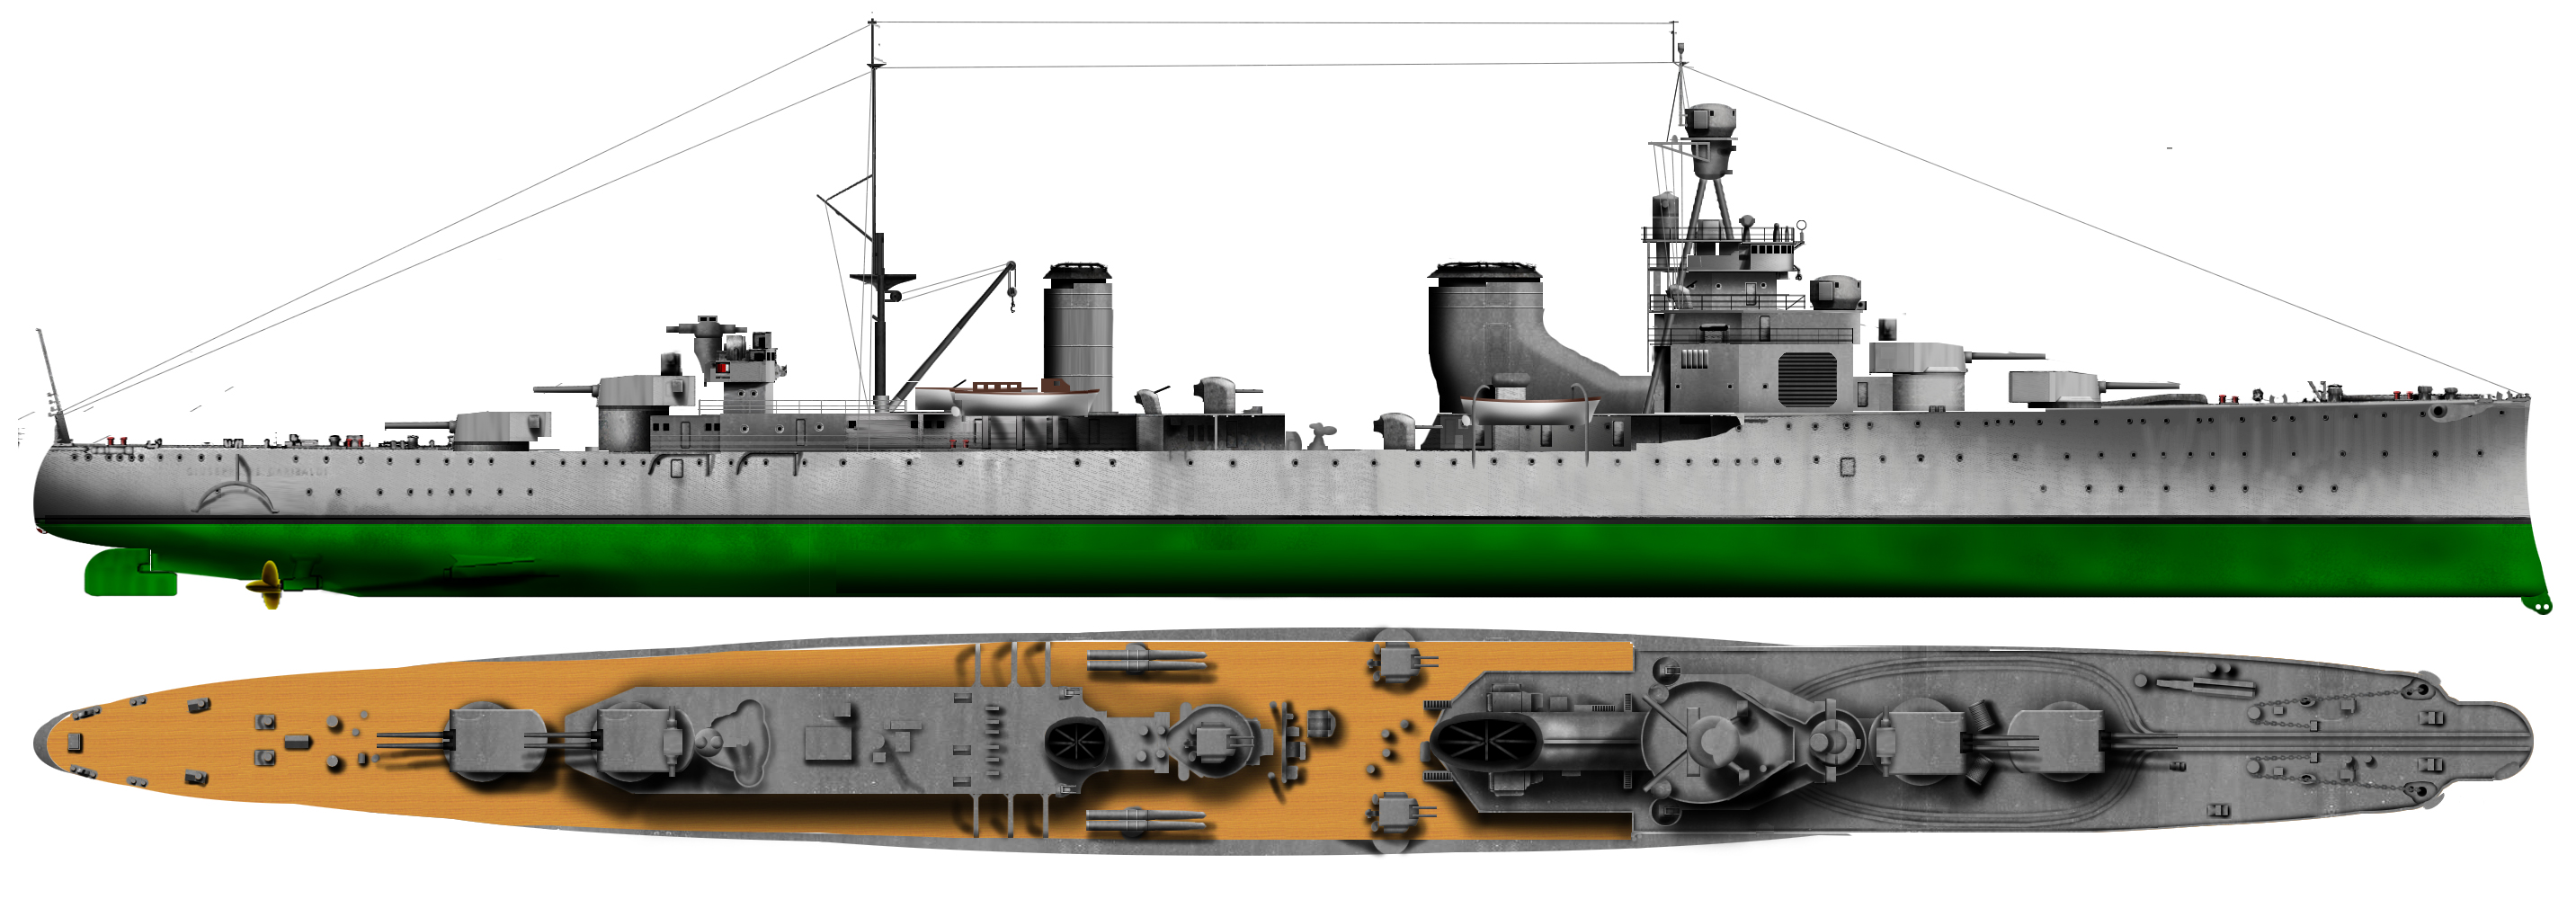 HD Illustration of the Guissano class